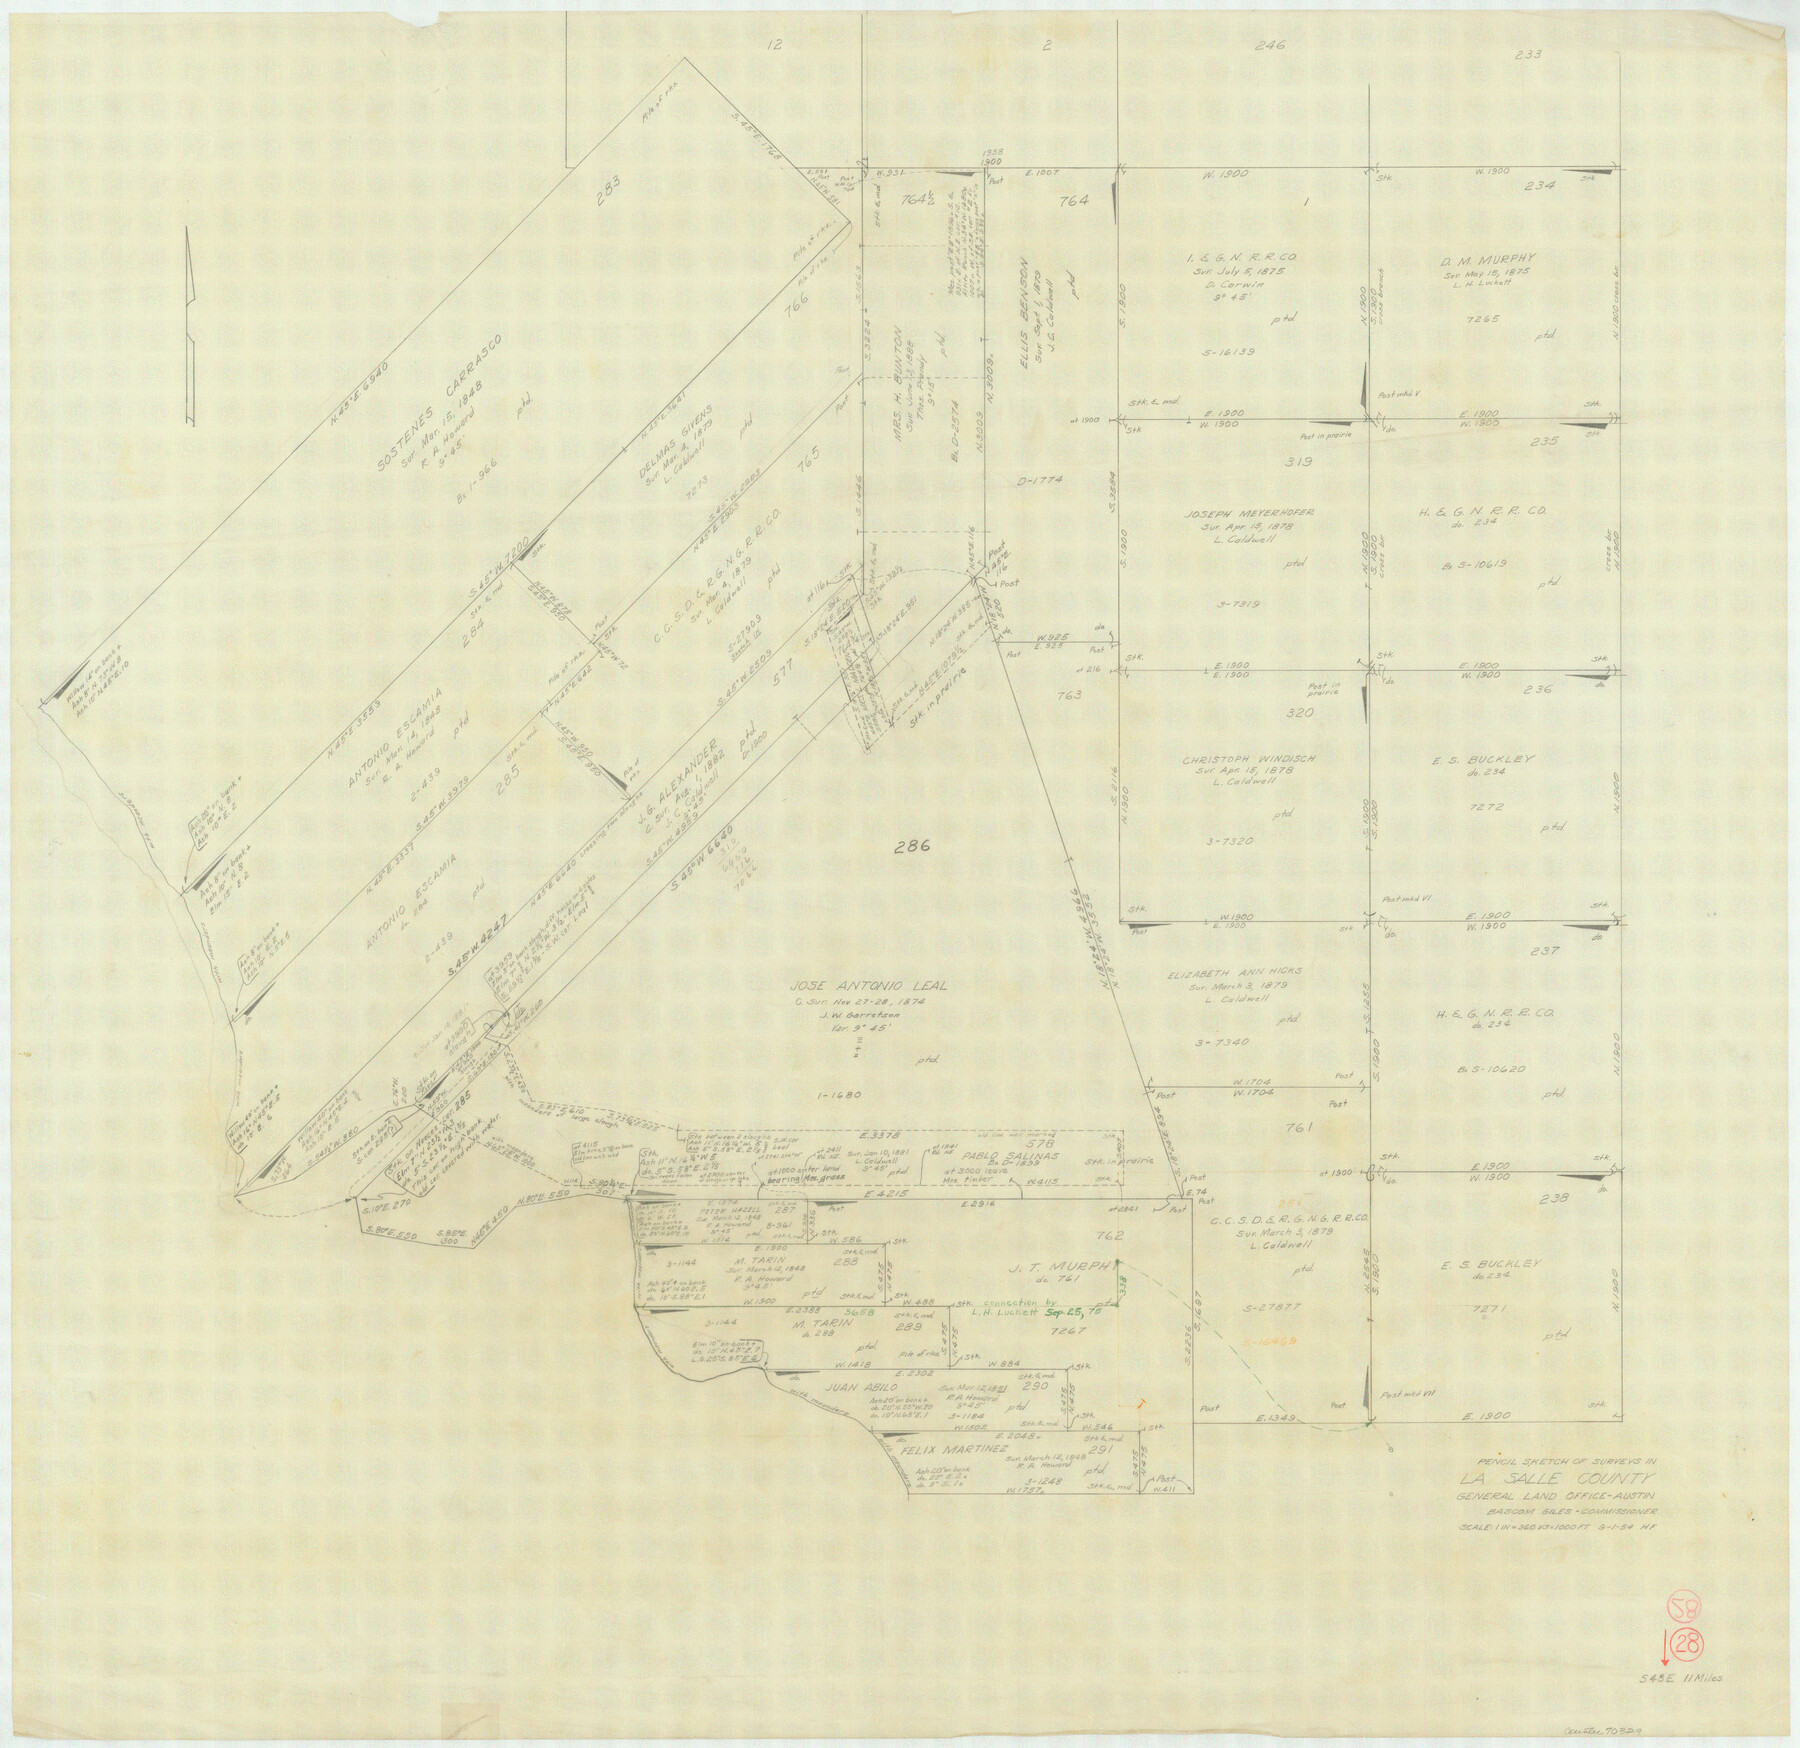 70329, La Salle County Working Sketch 28, General Map Collection